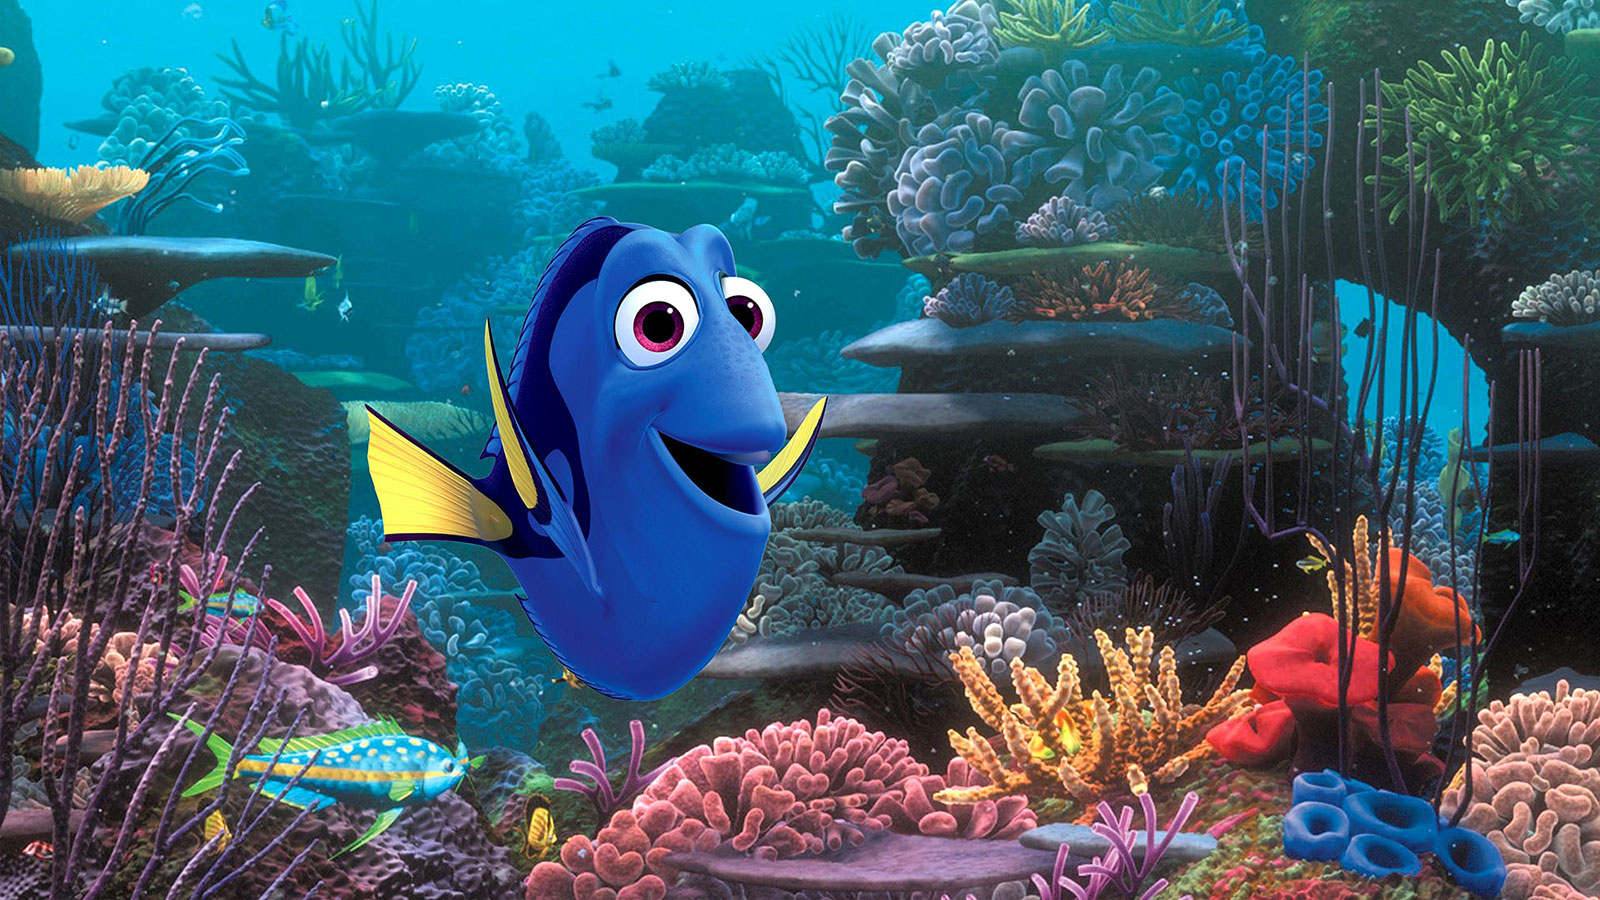 I Bet You Can’t Identify More Than 10/15 of These Pixar Movie Foods Finding Dory